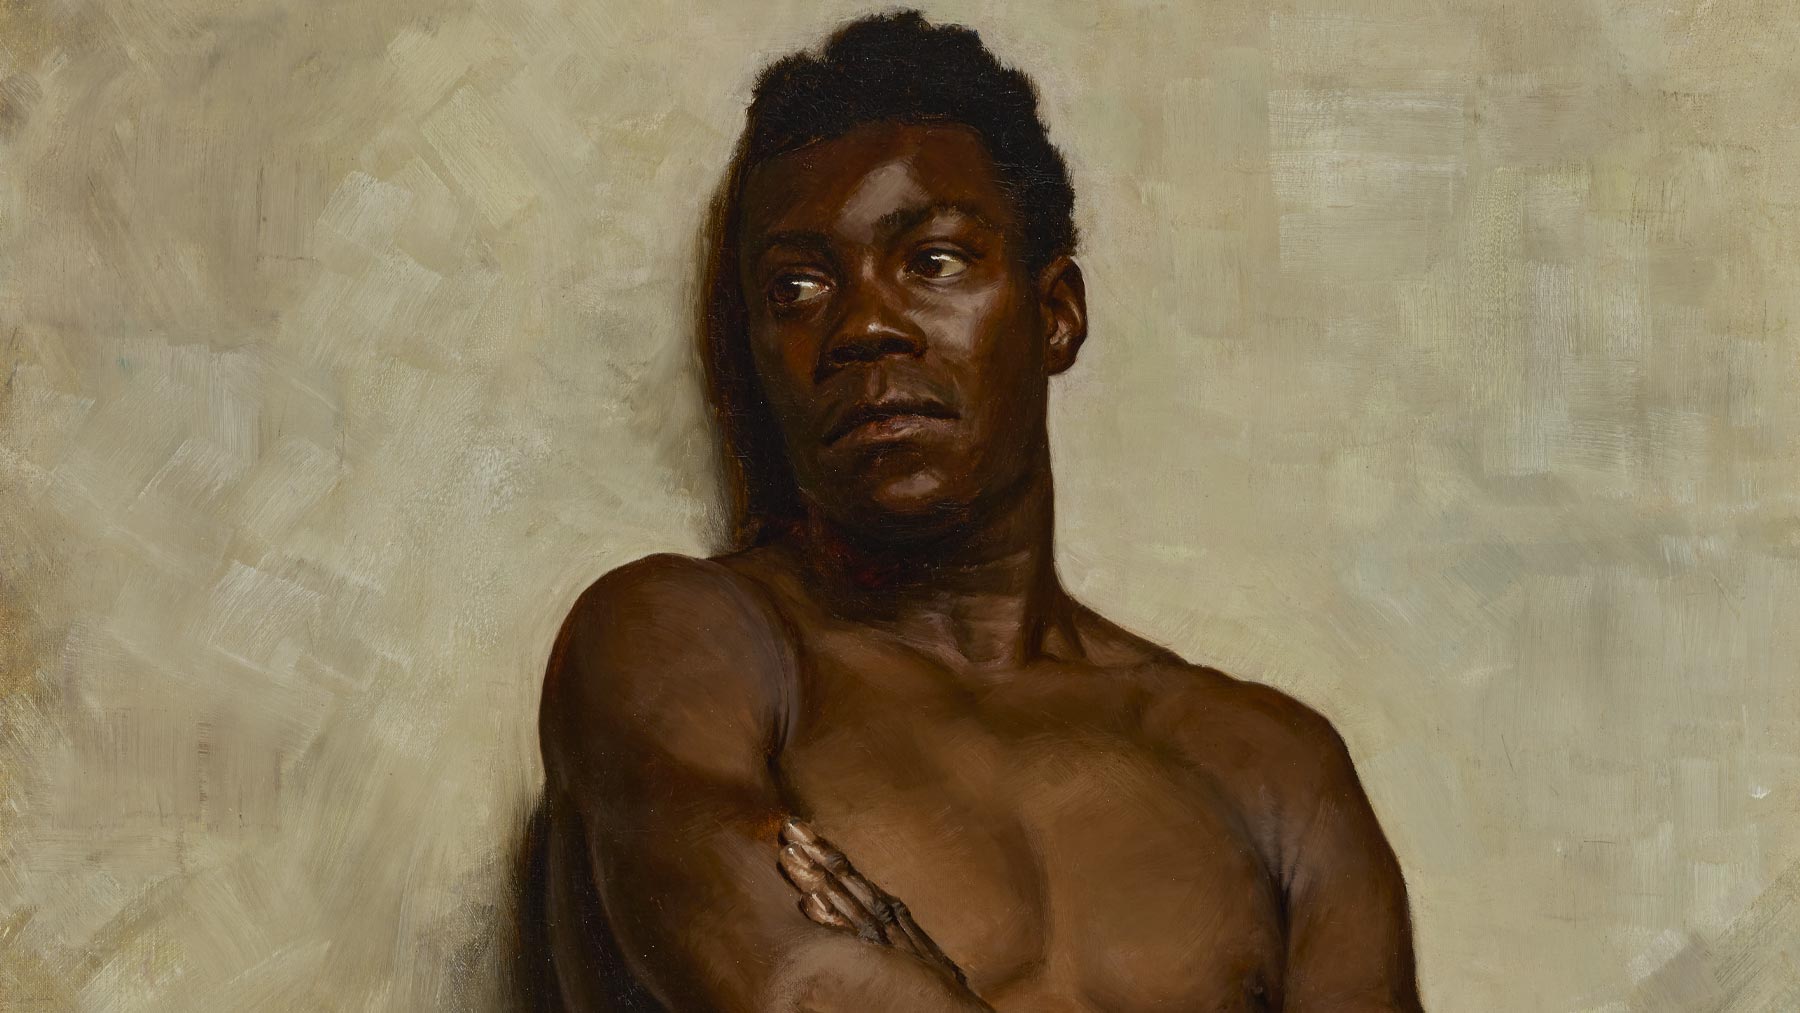 Black man with no shirt leaning against the wall with red and gold pants